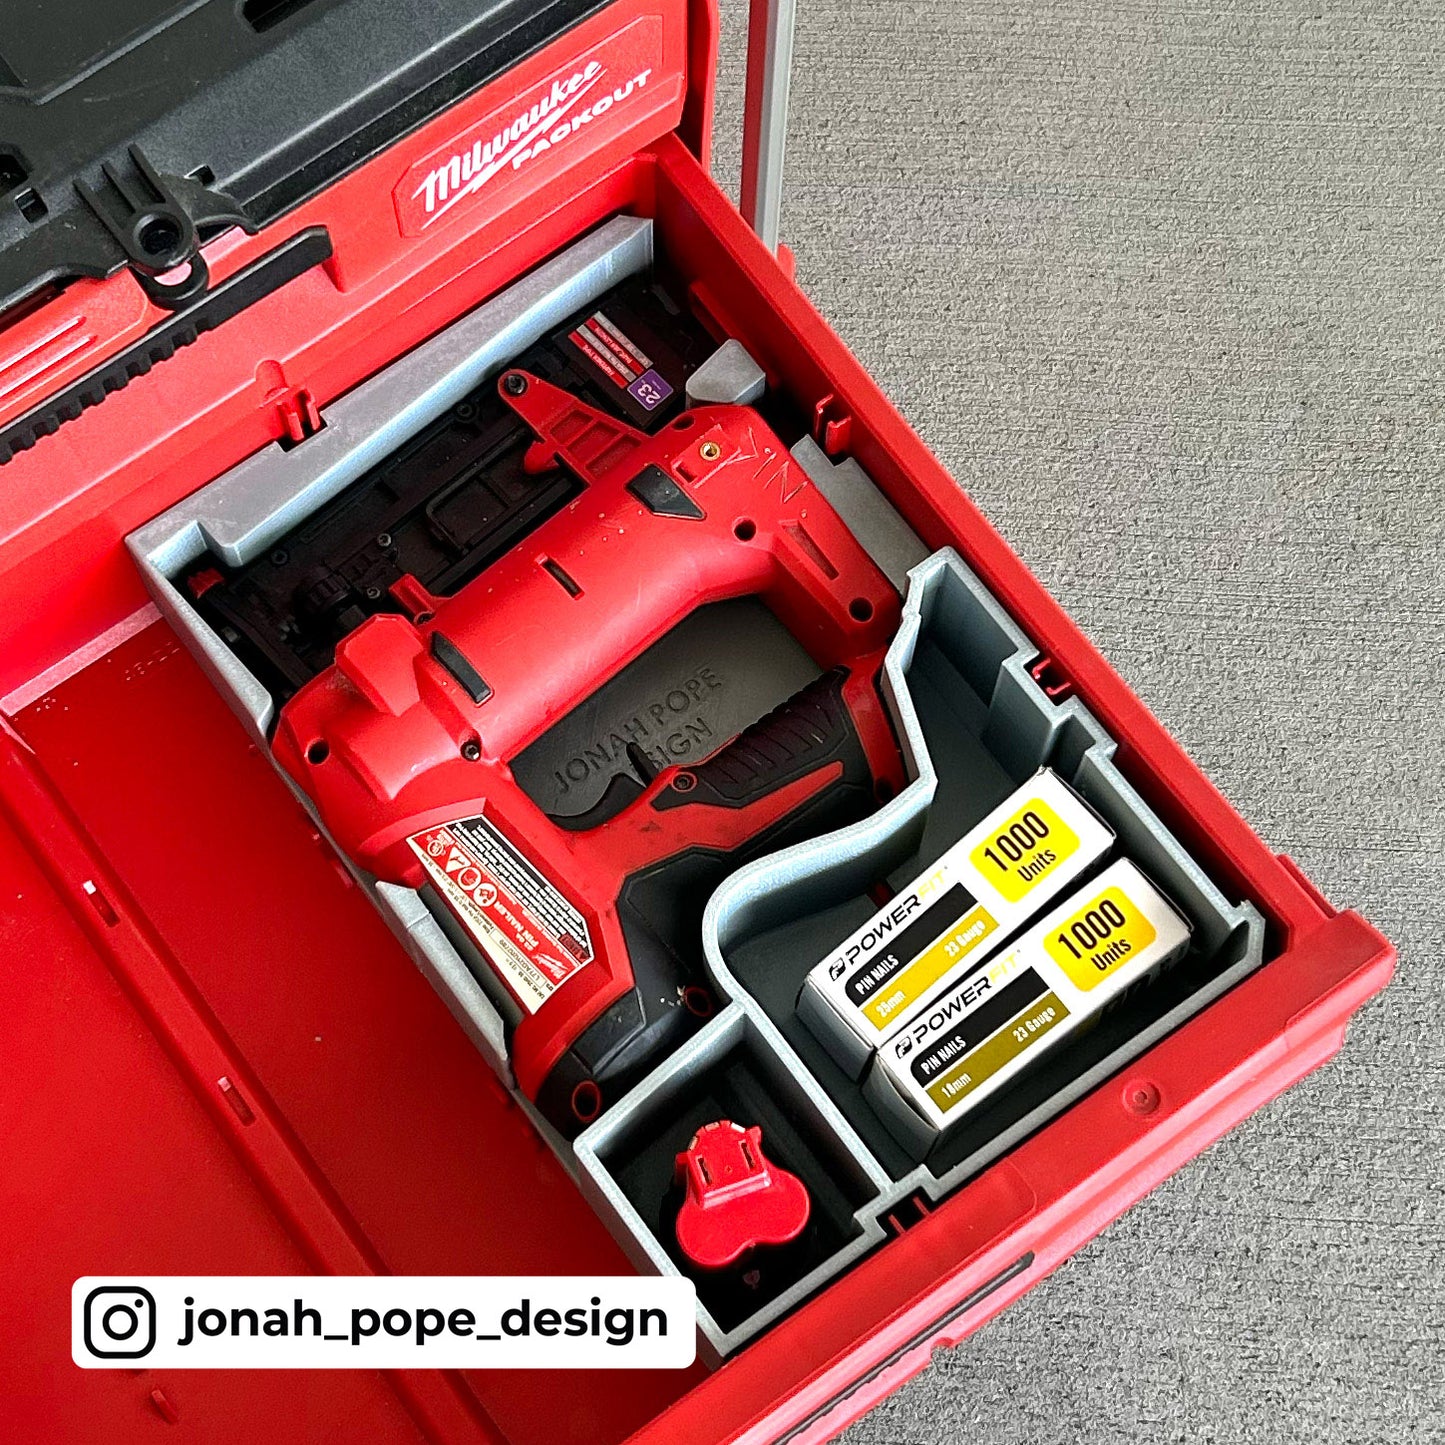 Milwaukee Packout M12 Pin Nailer Storage Insert for Milwaukee Packout 2/3 Draw By Jonah Pope Design